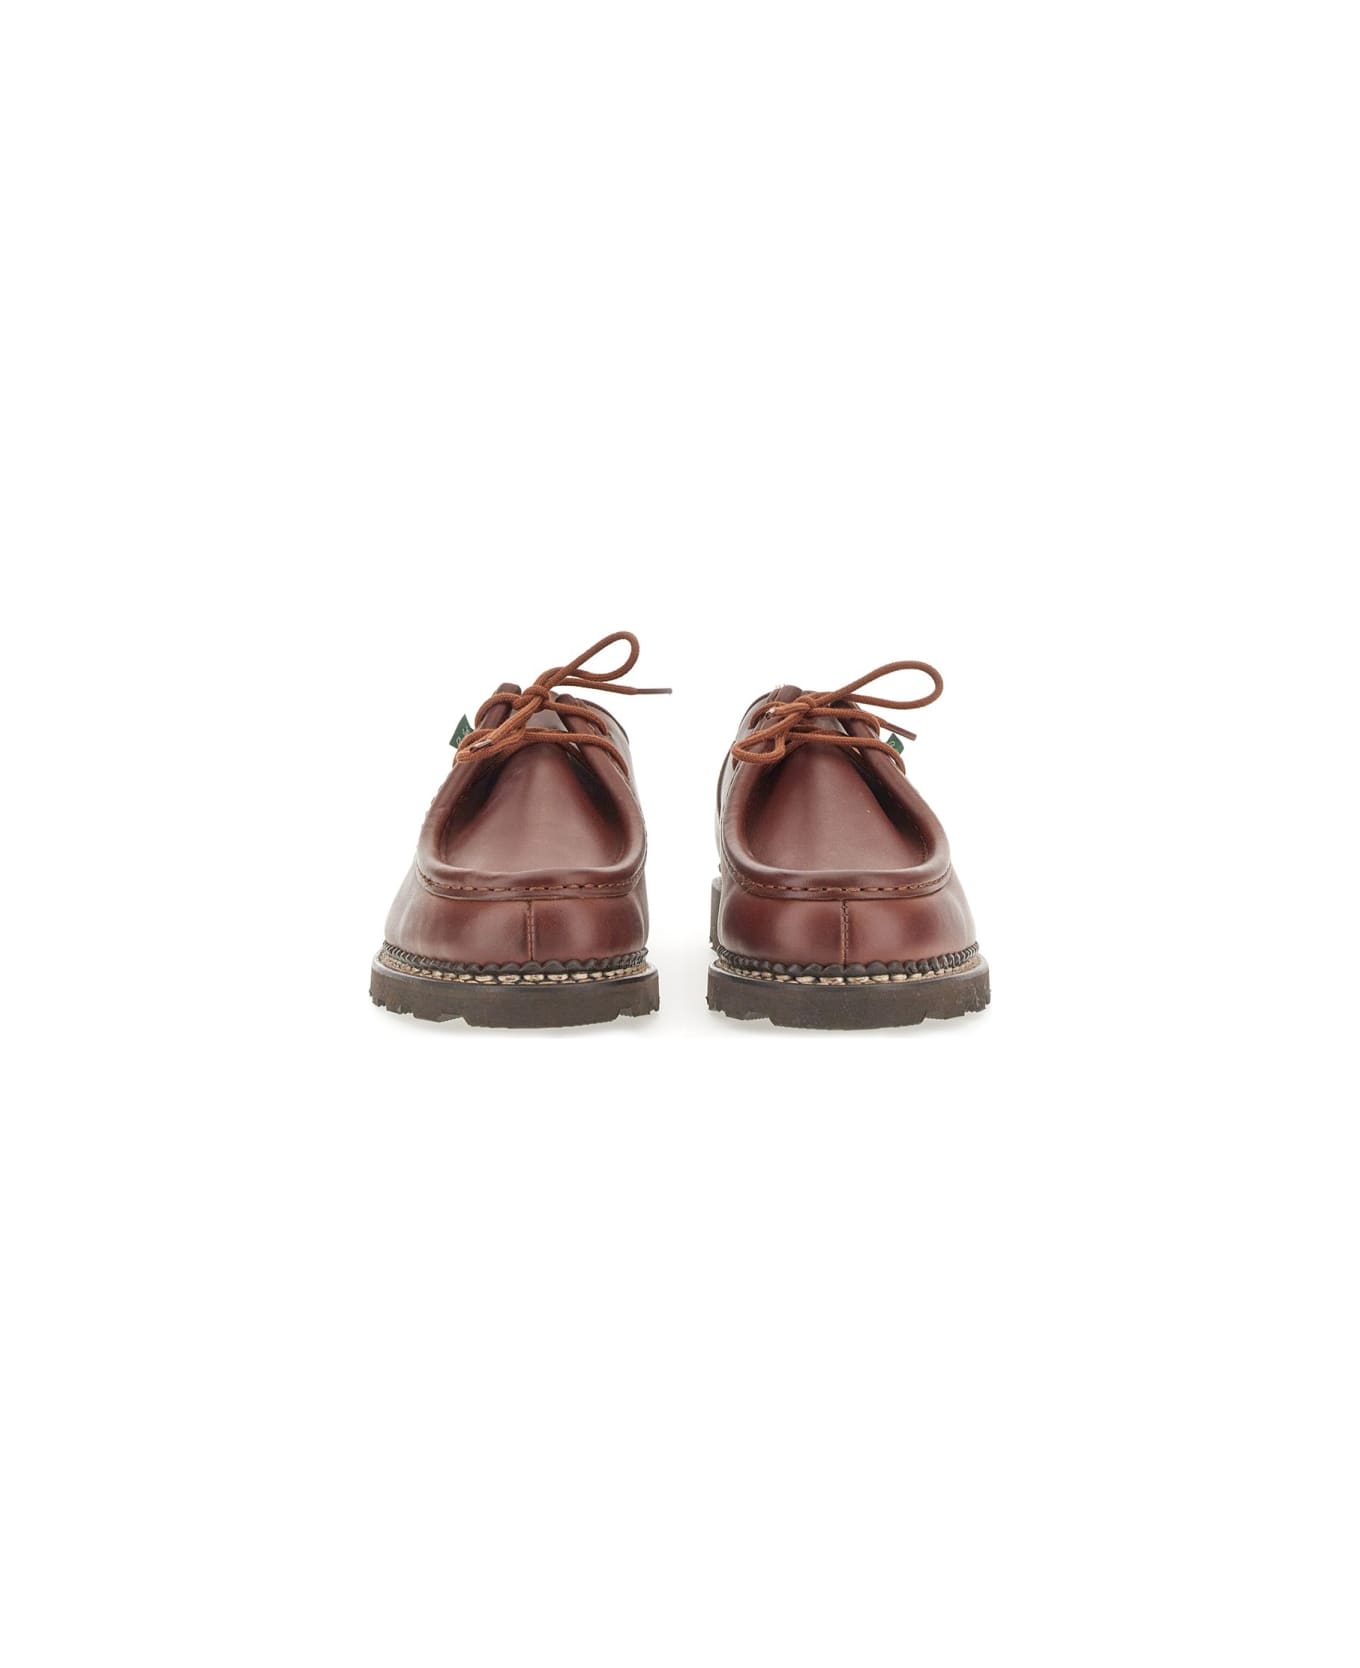 Paraboot Lace-up "michael" - BROWN